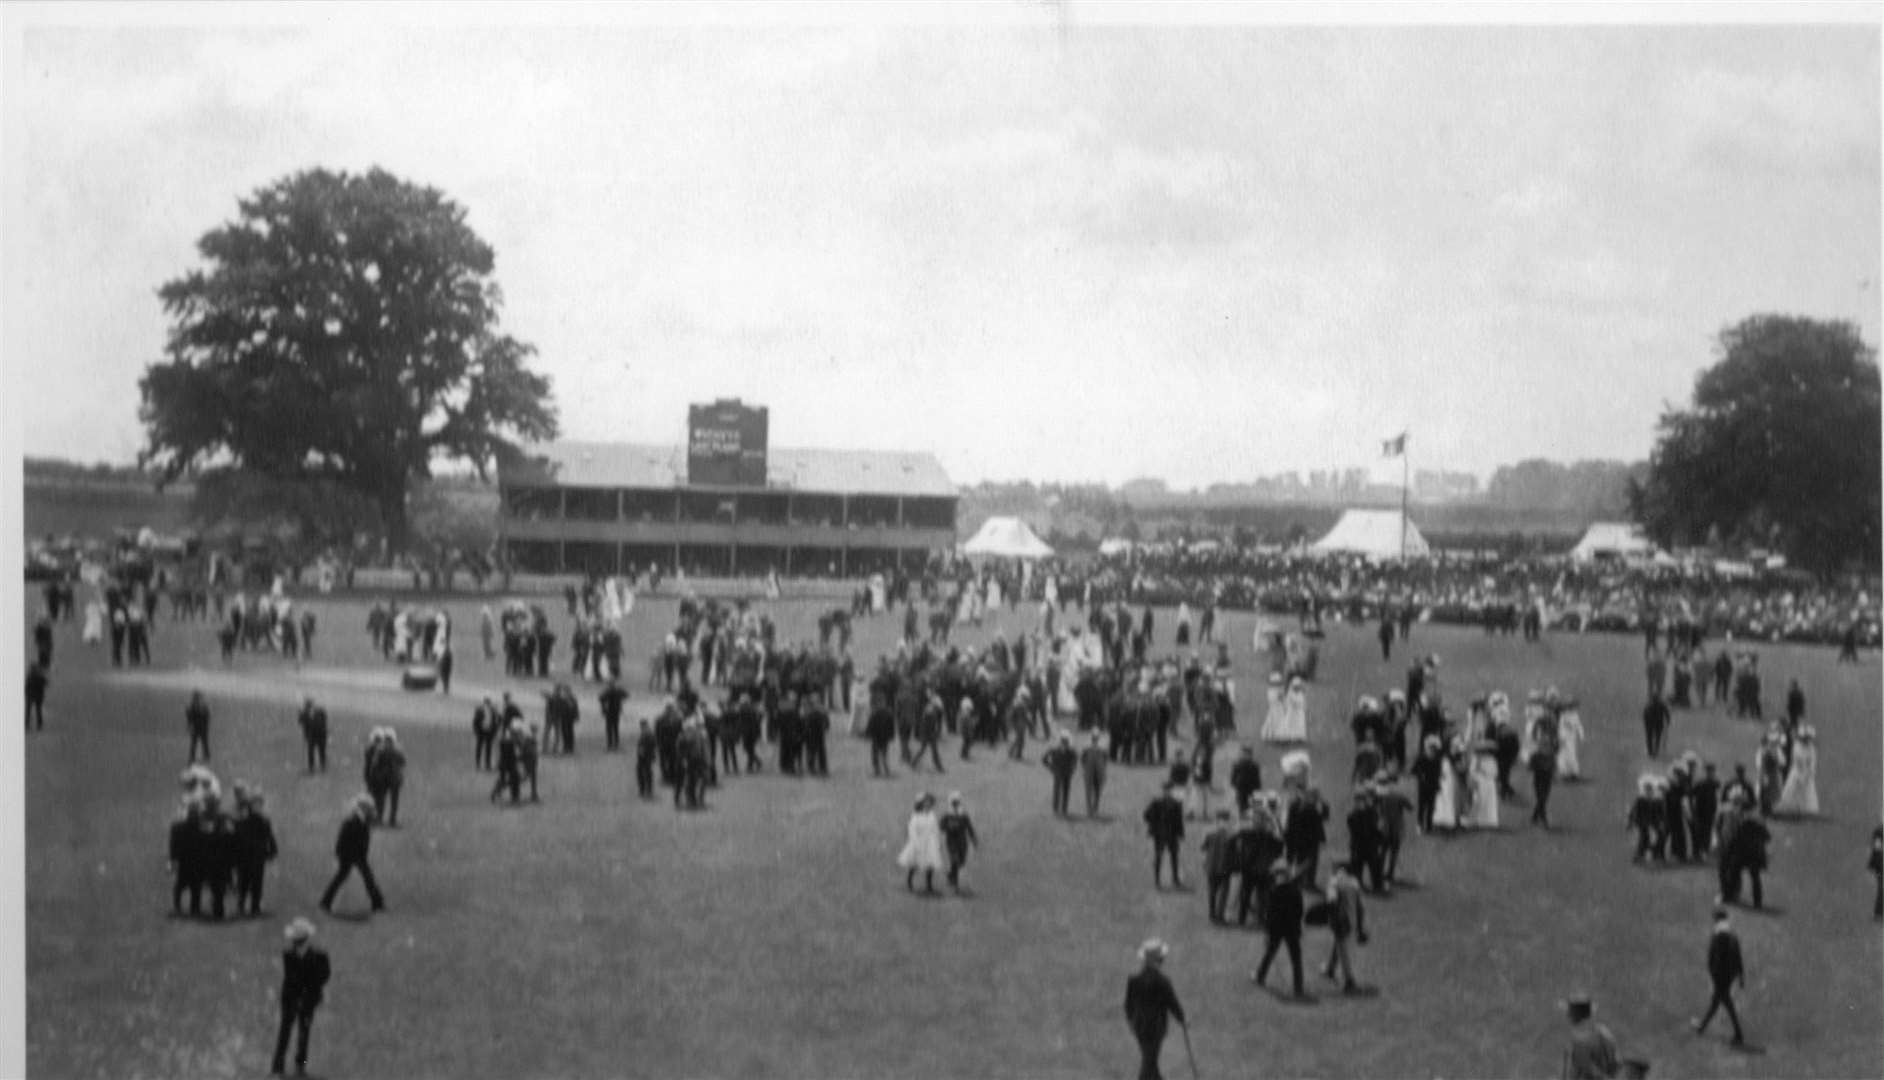 Canterbury's St Lawrence Ground - now Kent's main home - pictured in 1923. Picture: Ian Phipps/Kent County Cricket Grounds by Howard Milton and Peter Francis